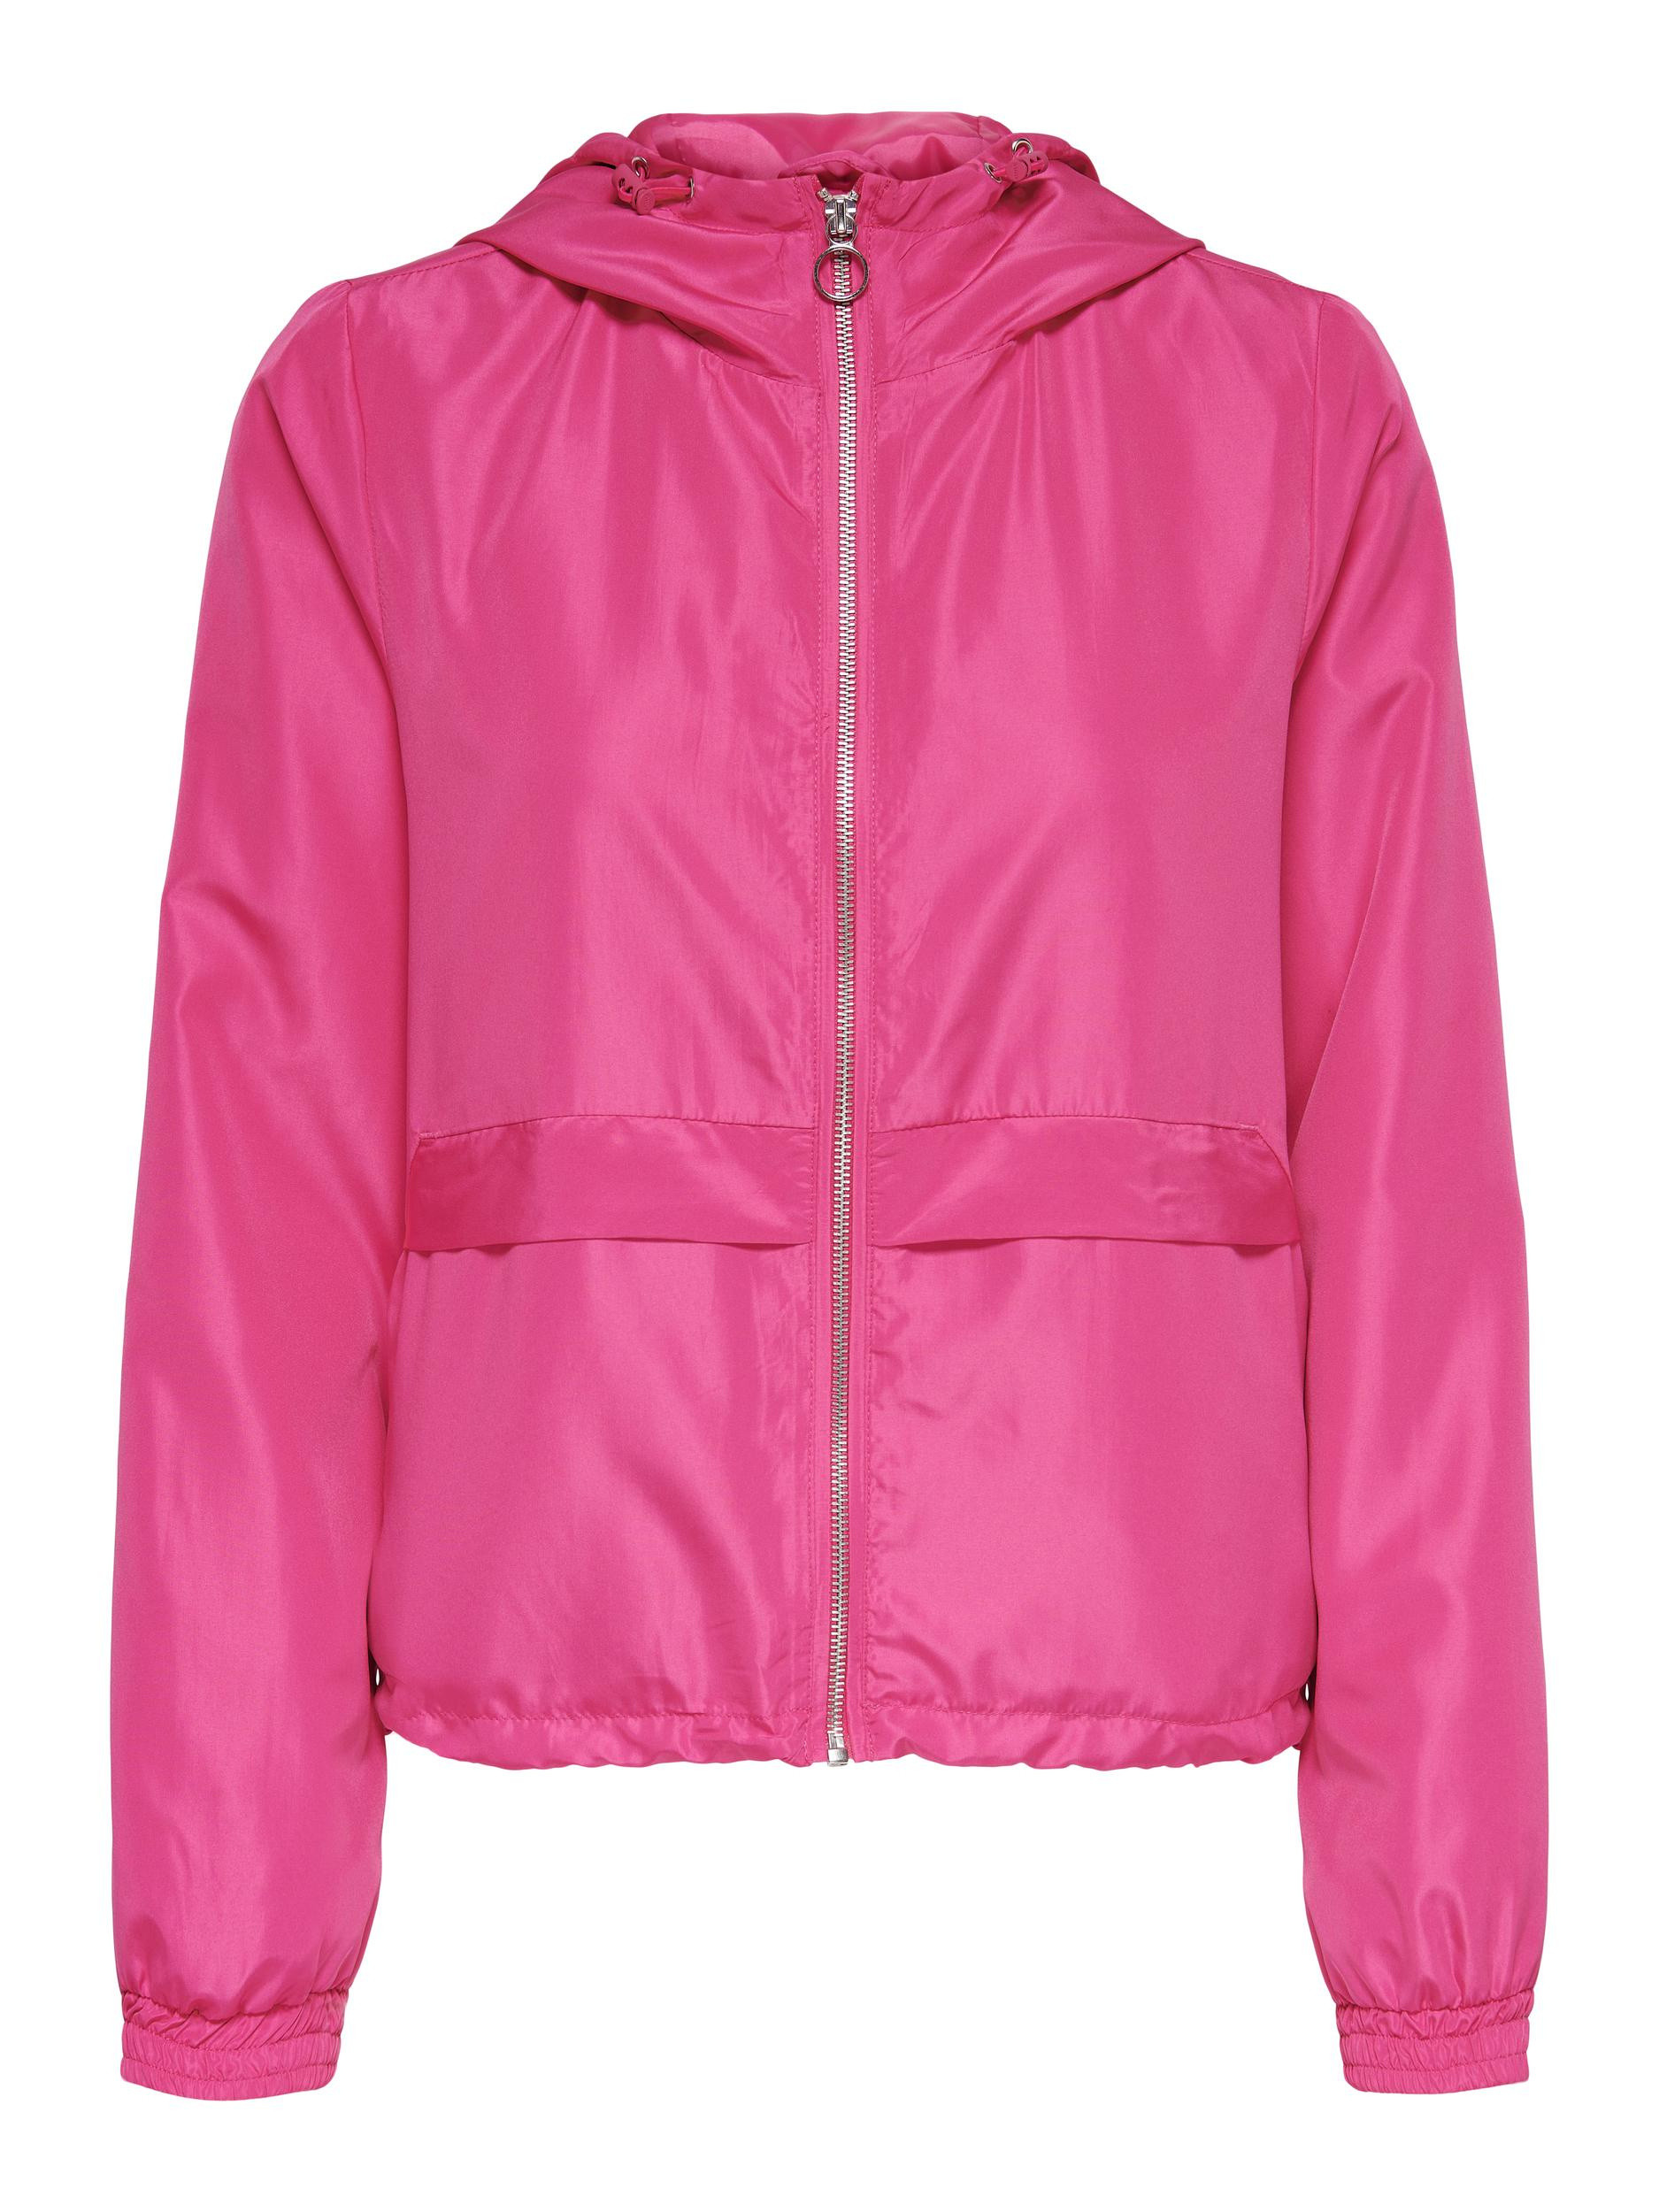 Only - Jacket with zip, Pink Fuchsia, large image number 0